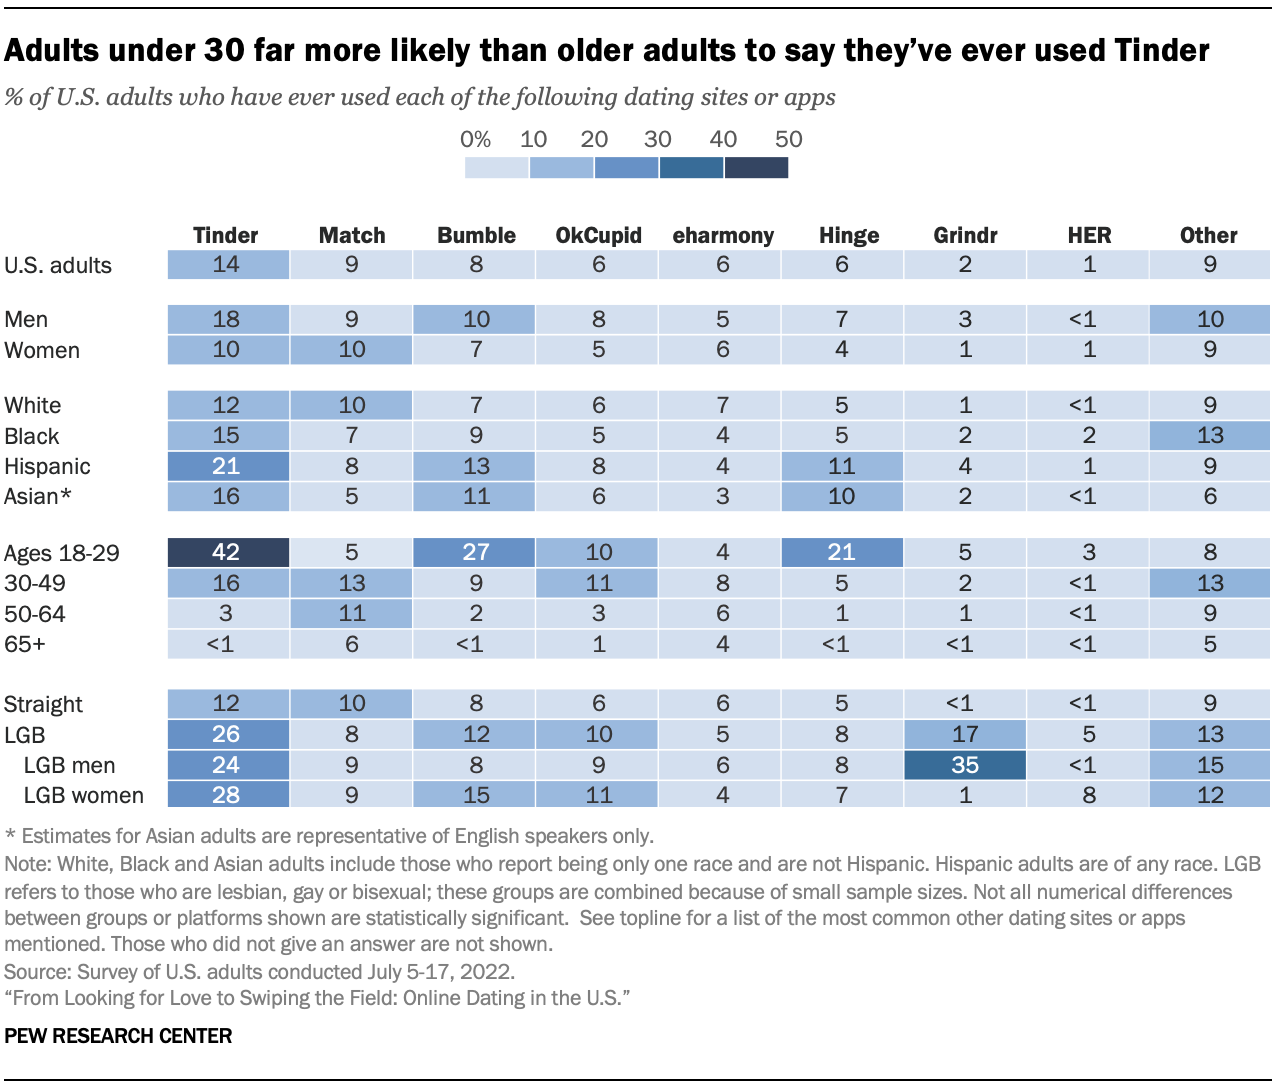 Adults under 30 far more likely than older adults to say they’ve ever used Tinder